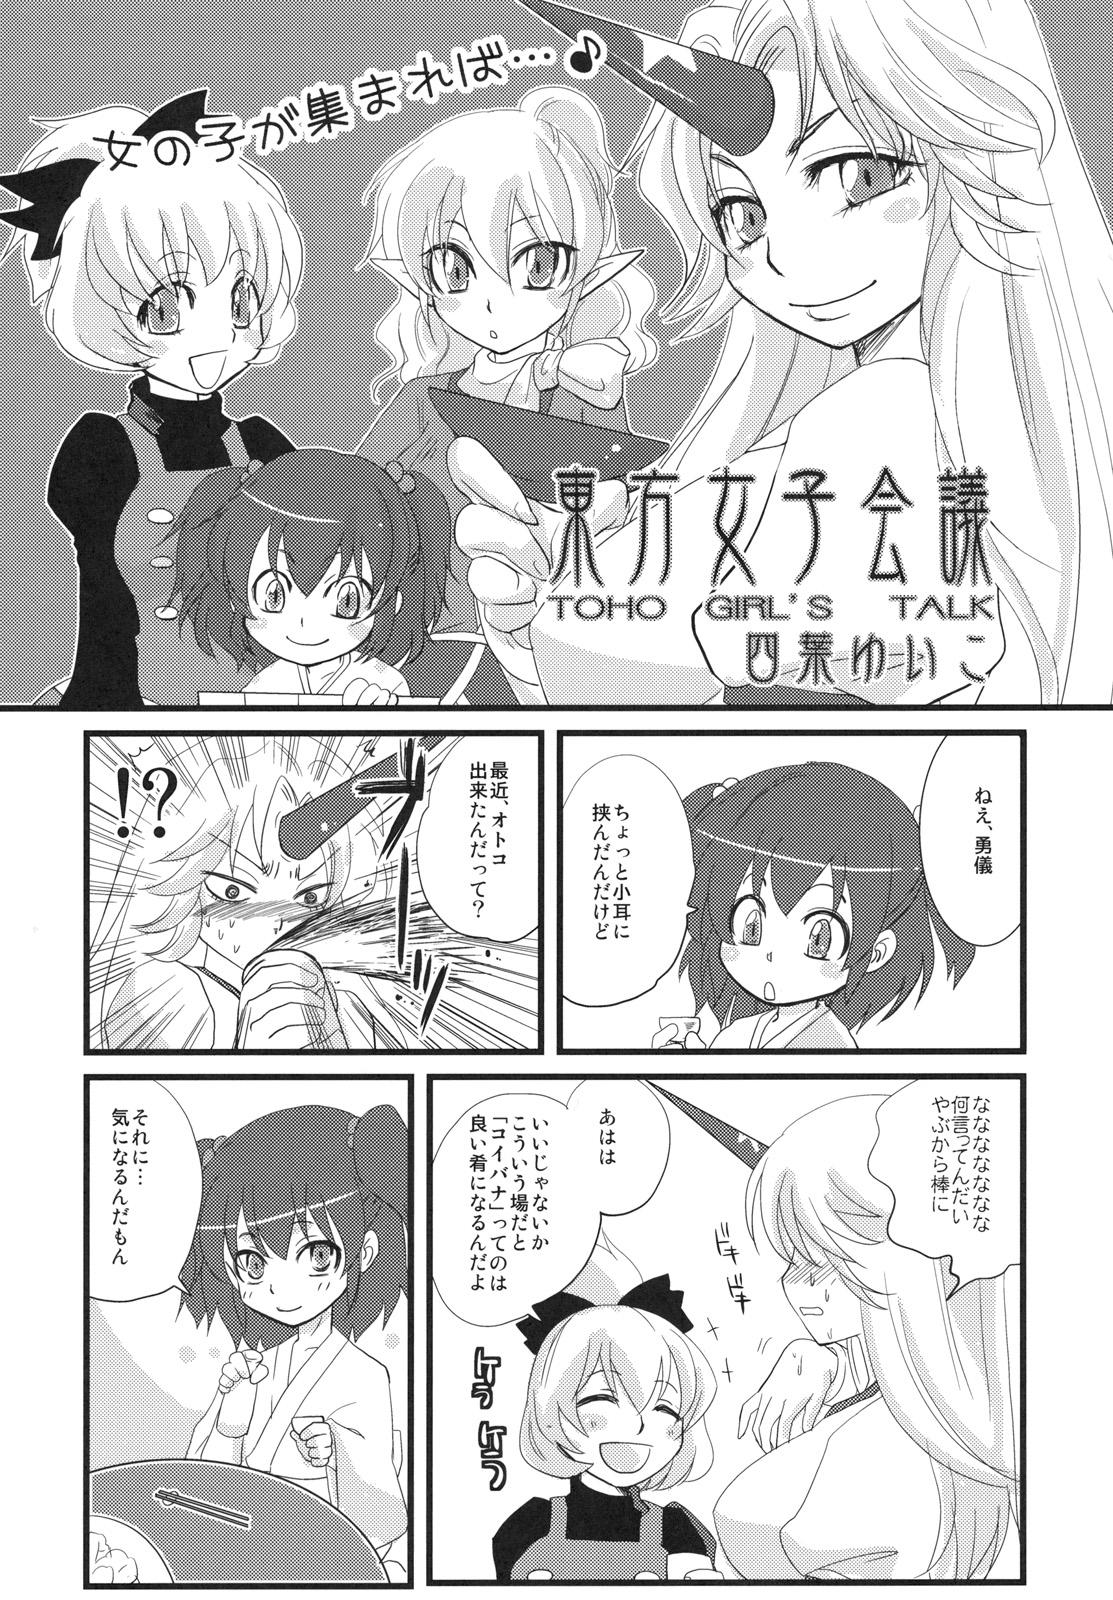 Les Touhou Under the Shrine - Touhou project Twerk - Page 5